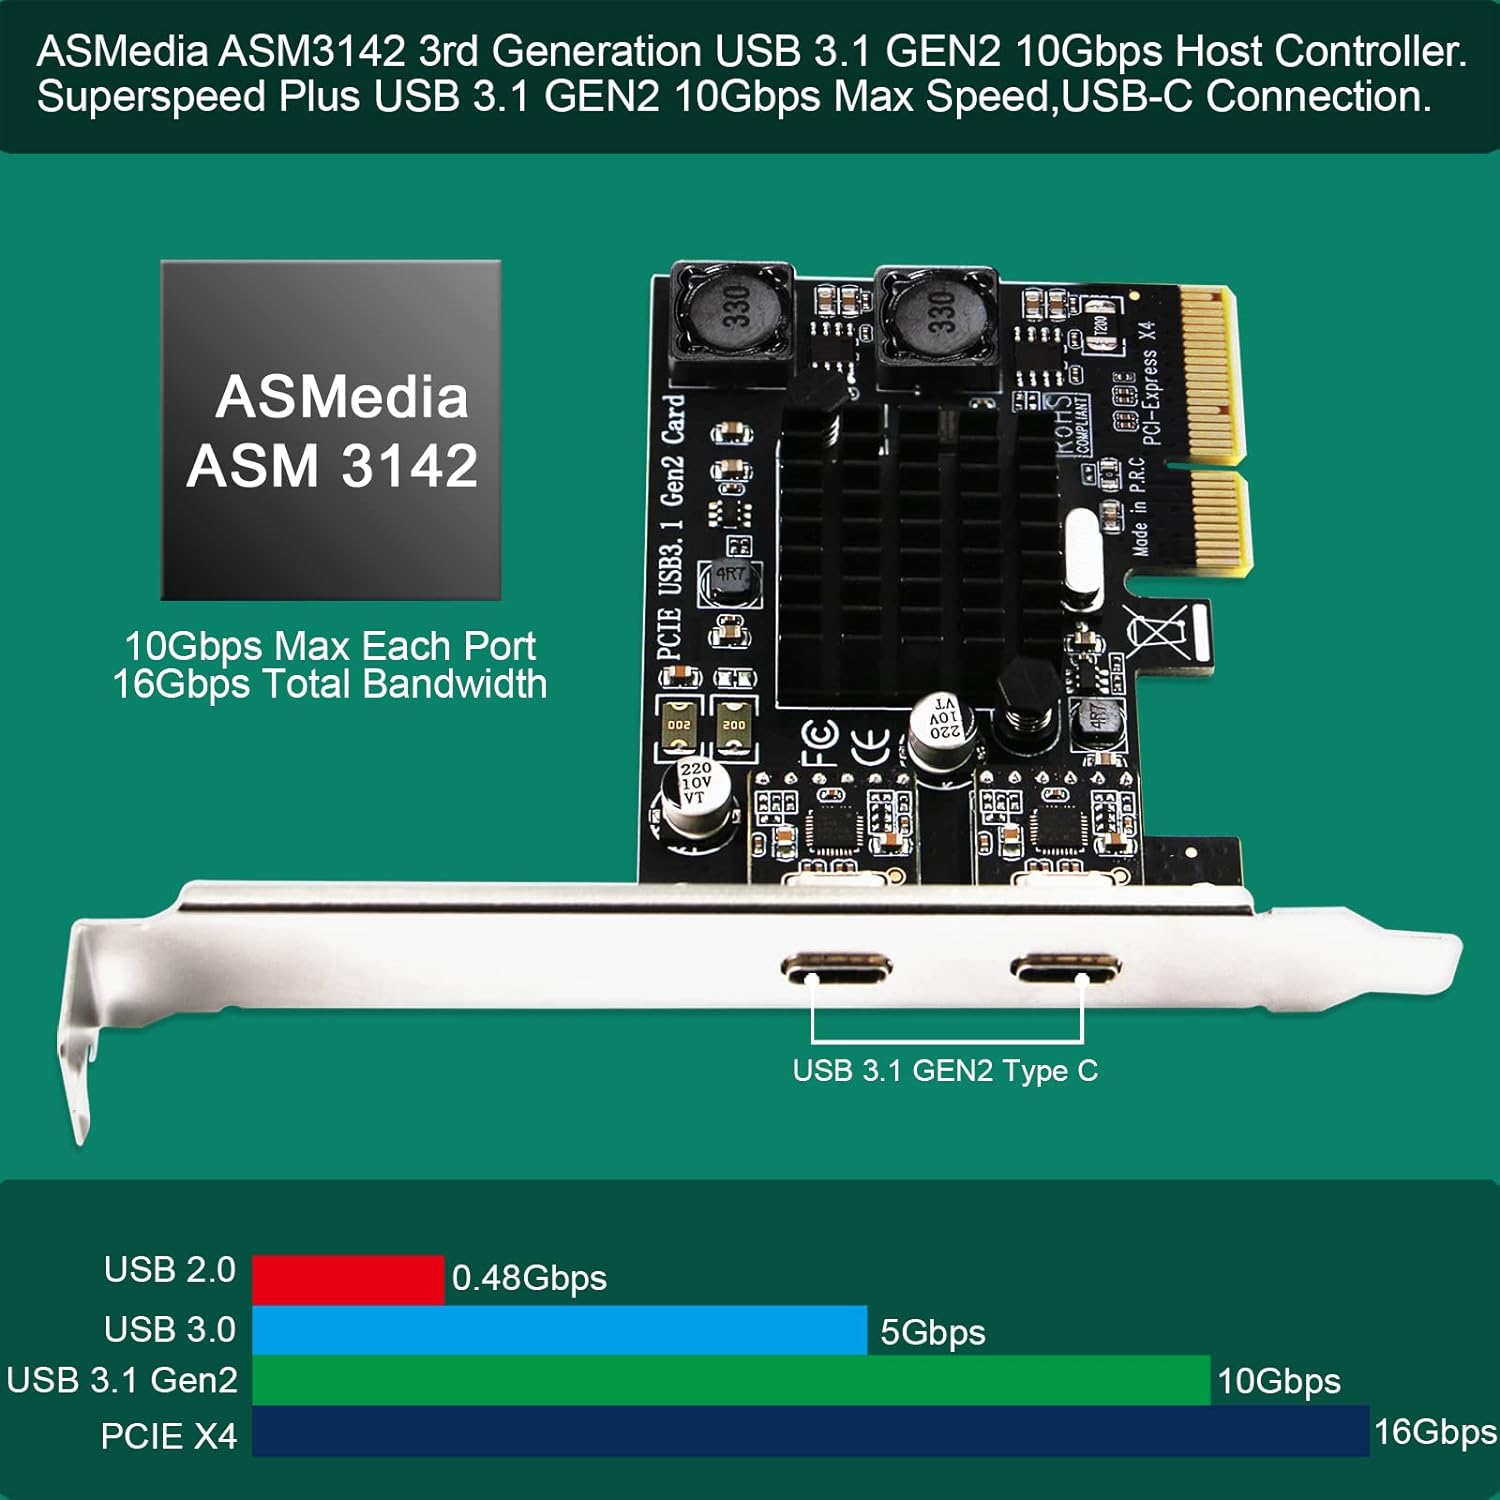 FebSmart 2X 10Gbps Max Speed USB-C Ports PCIE USB 3.1 Gen 2 Expansion Card for Windows, MAC OS and Linux Systems-Build in FebSmart Self-Powered Technology, No Need Additional Power Supply (FS-C2-Pro)